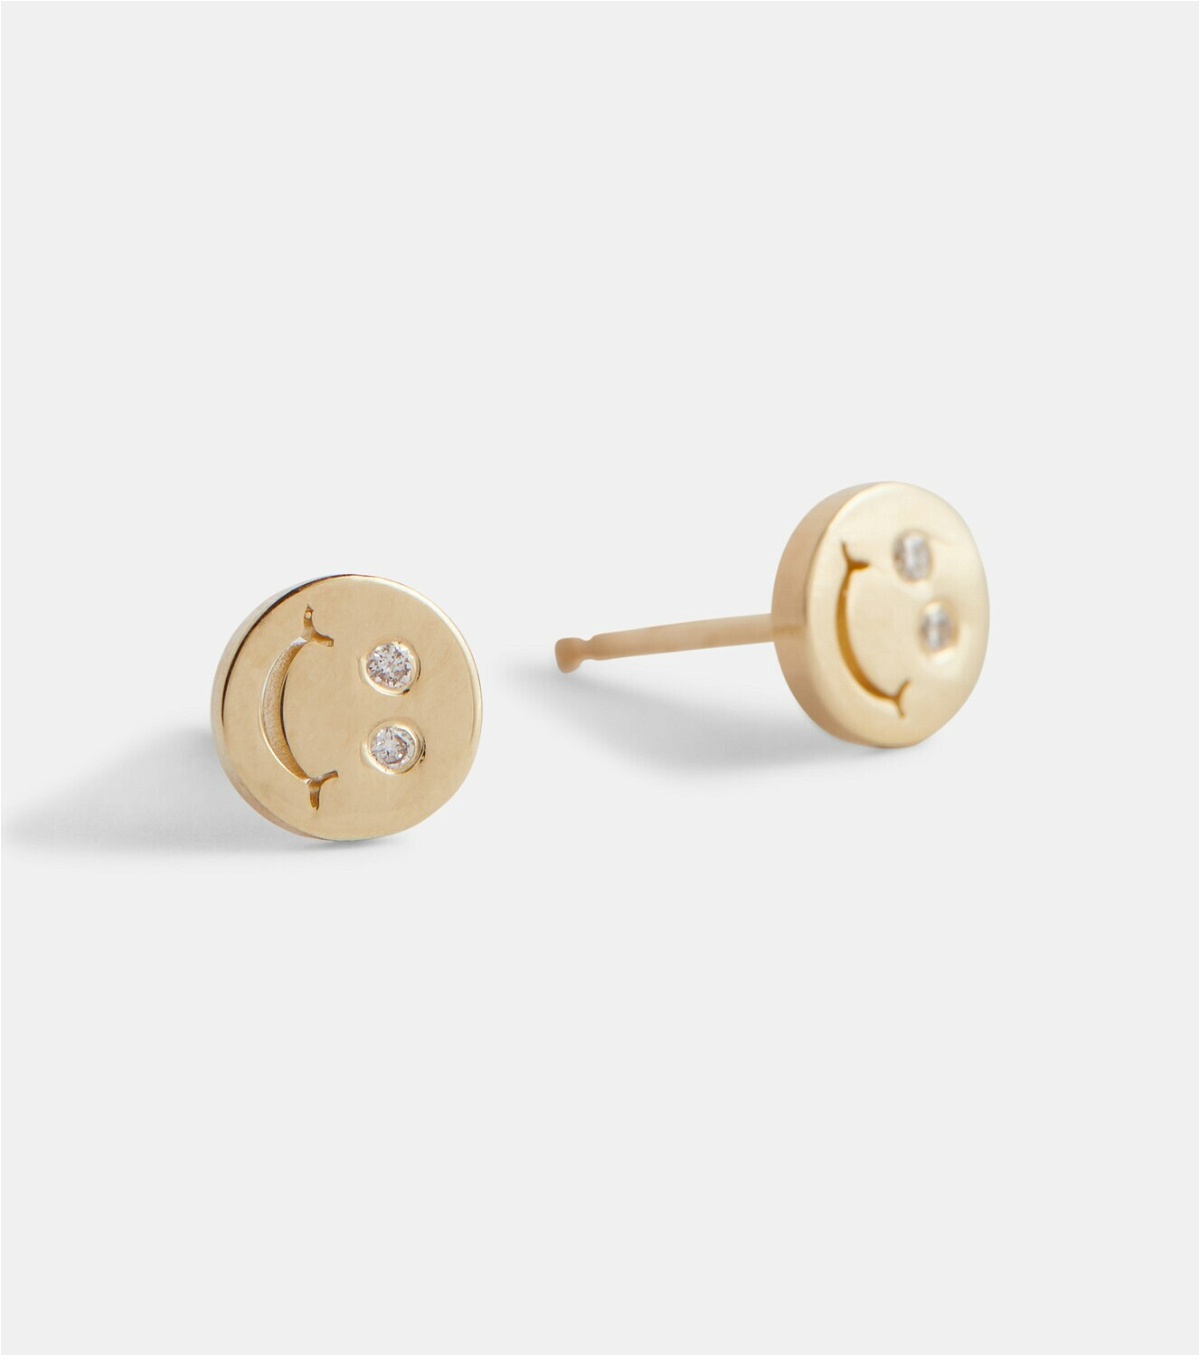 Sydney Evan Happy Face 14kt gold and diamond earrings